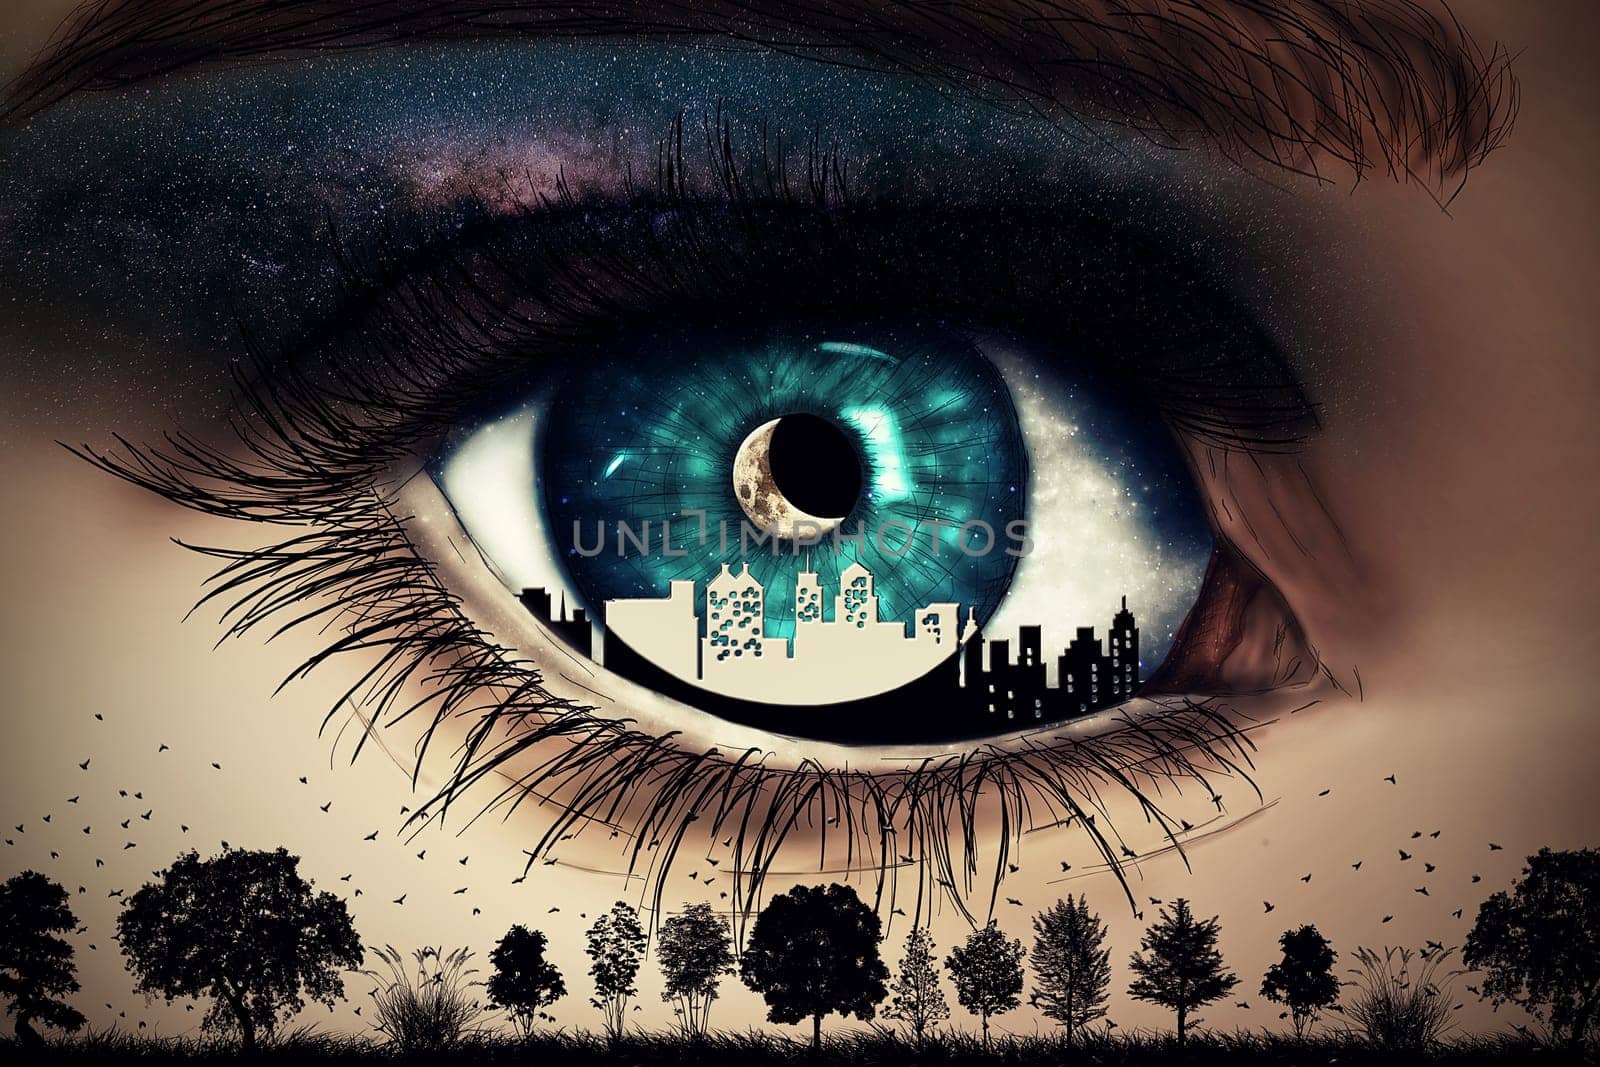 Illustration of a painted, blue woman eye with a city inside looking at wild nature with trees and birds flying below a starry night sky with a new moon